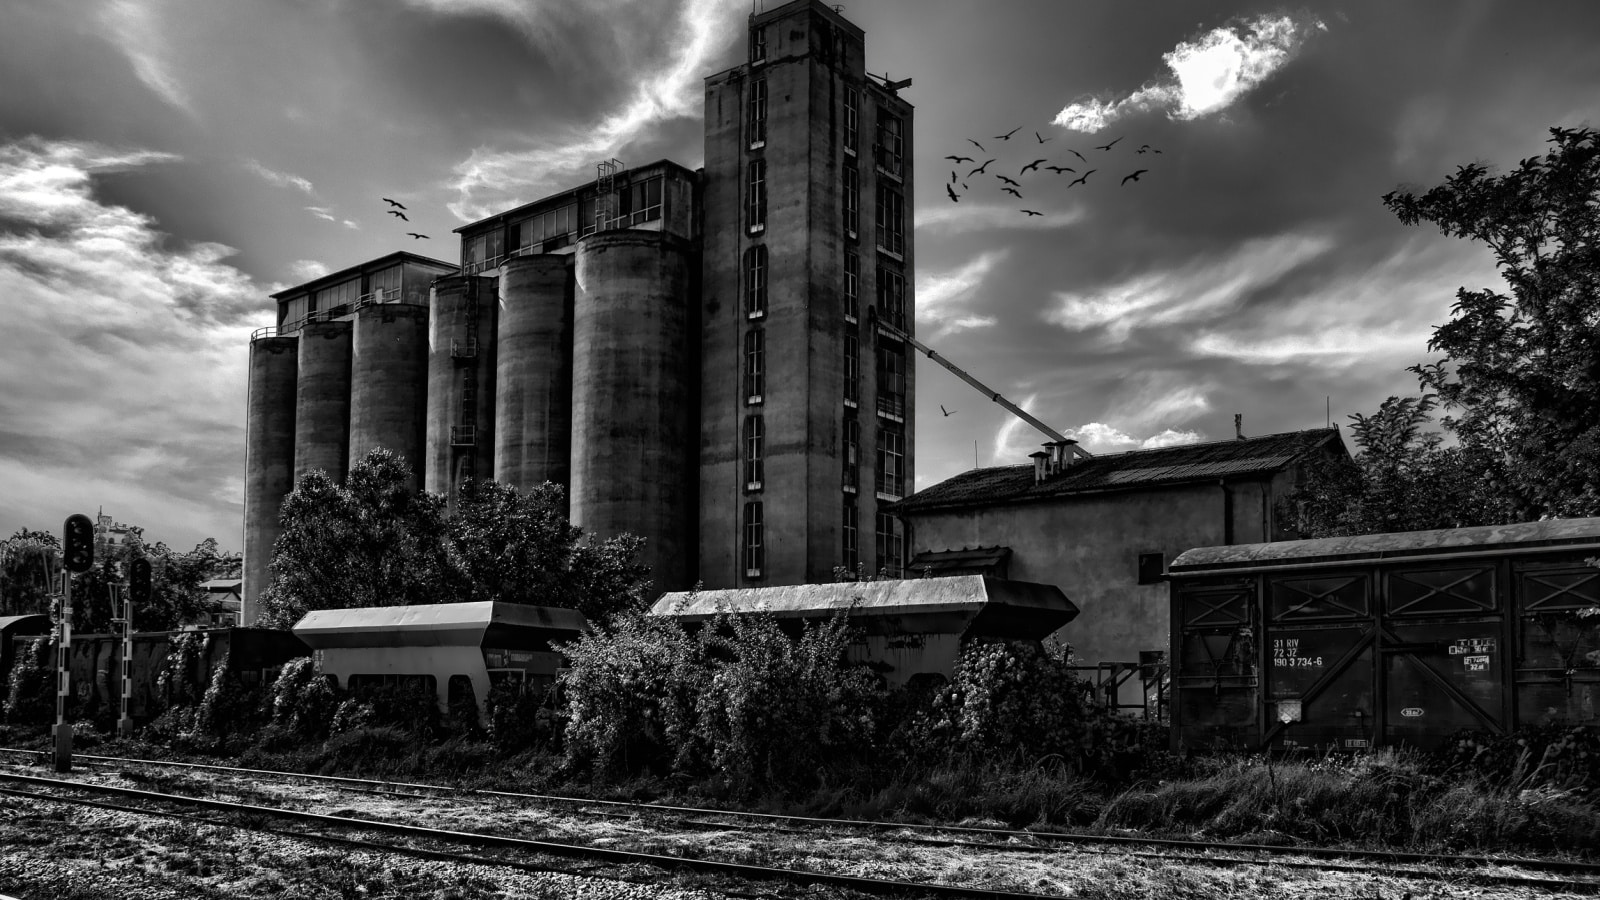 Spooky black and white photo of grain elevator and railroad with flock of black birds.